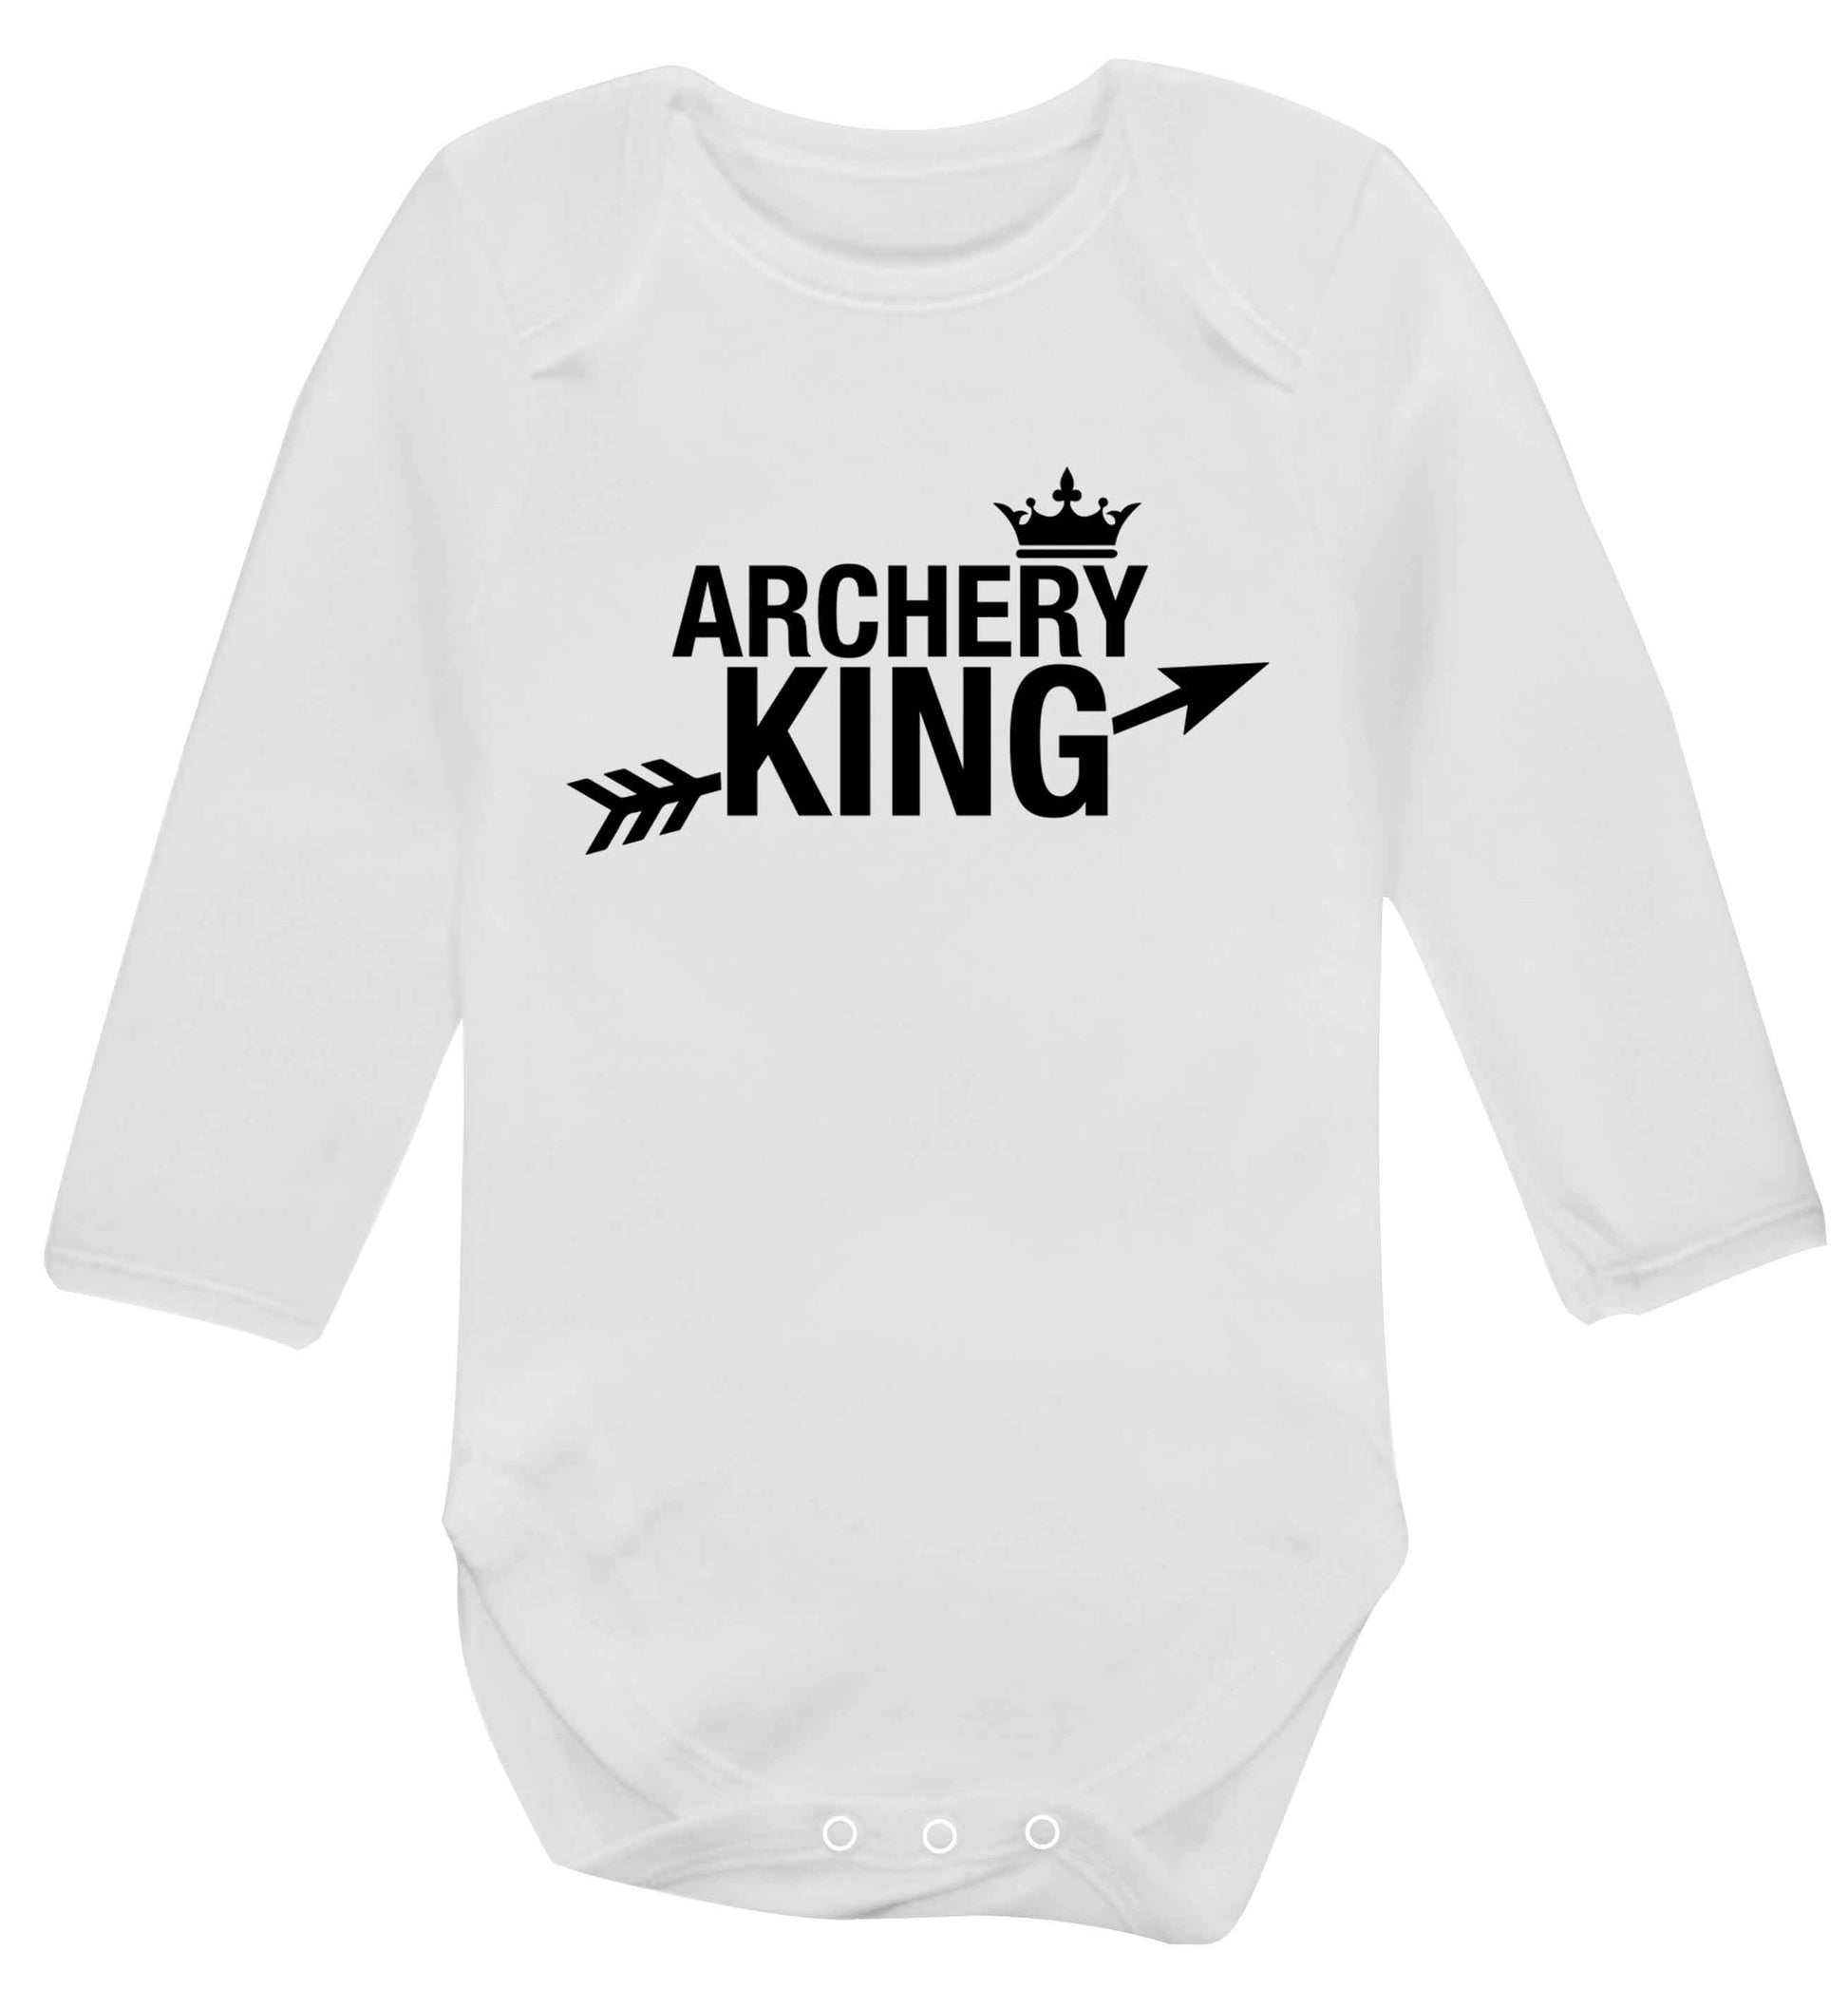 Archery king Baby Vest long sleeved white 6-12 months